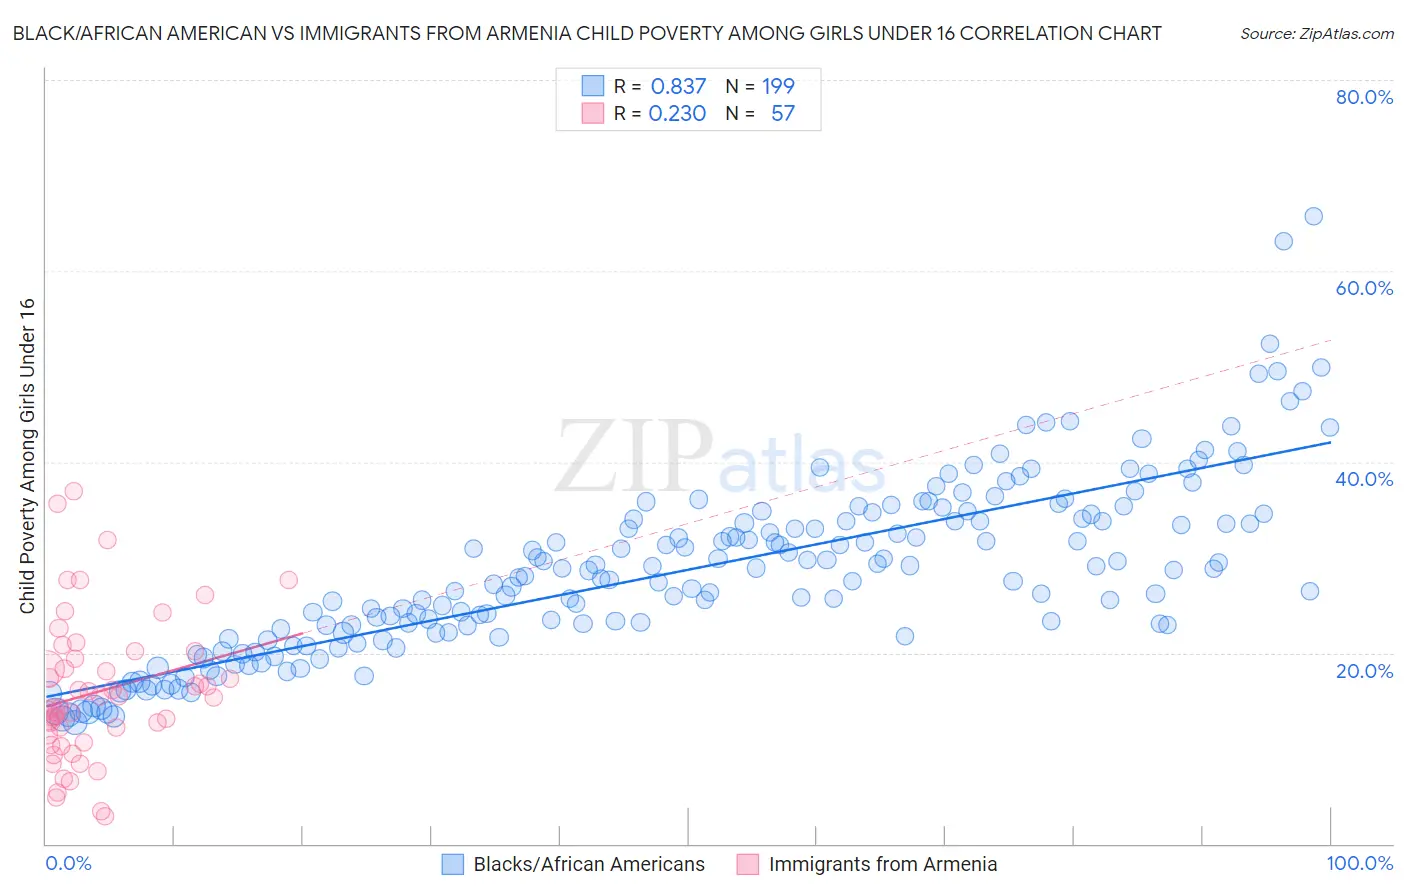 Black/African American vs Immigrants from Armenia Child Poverty Among Girls Under 16